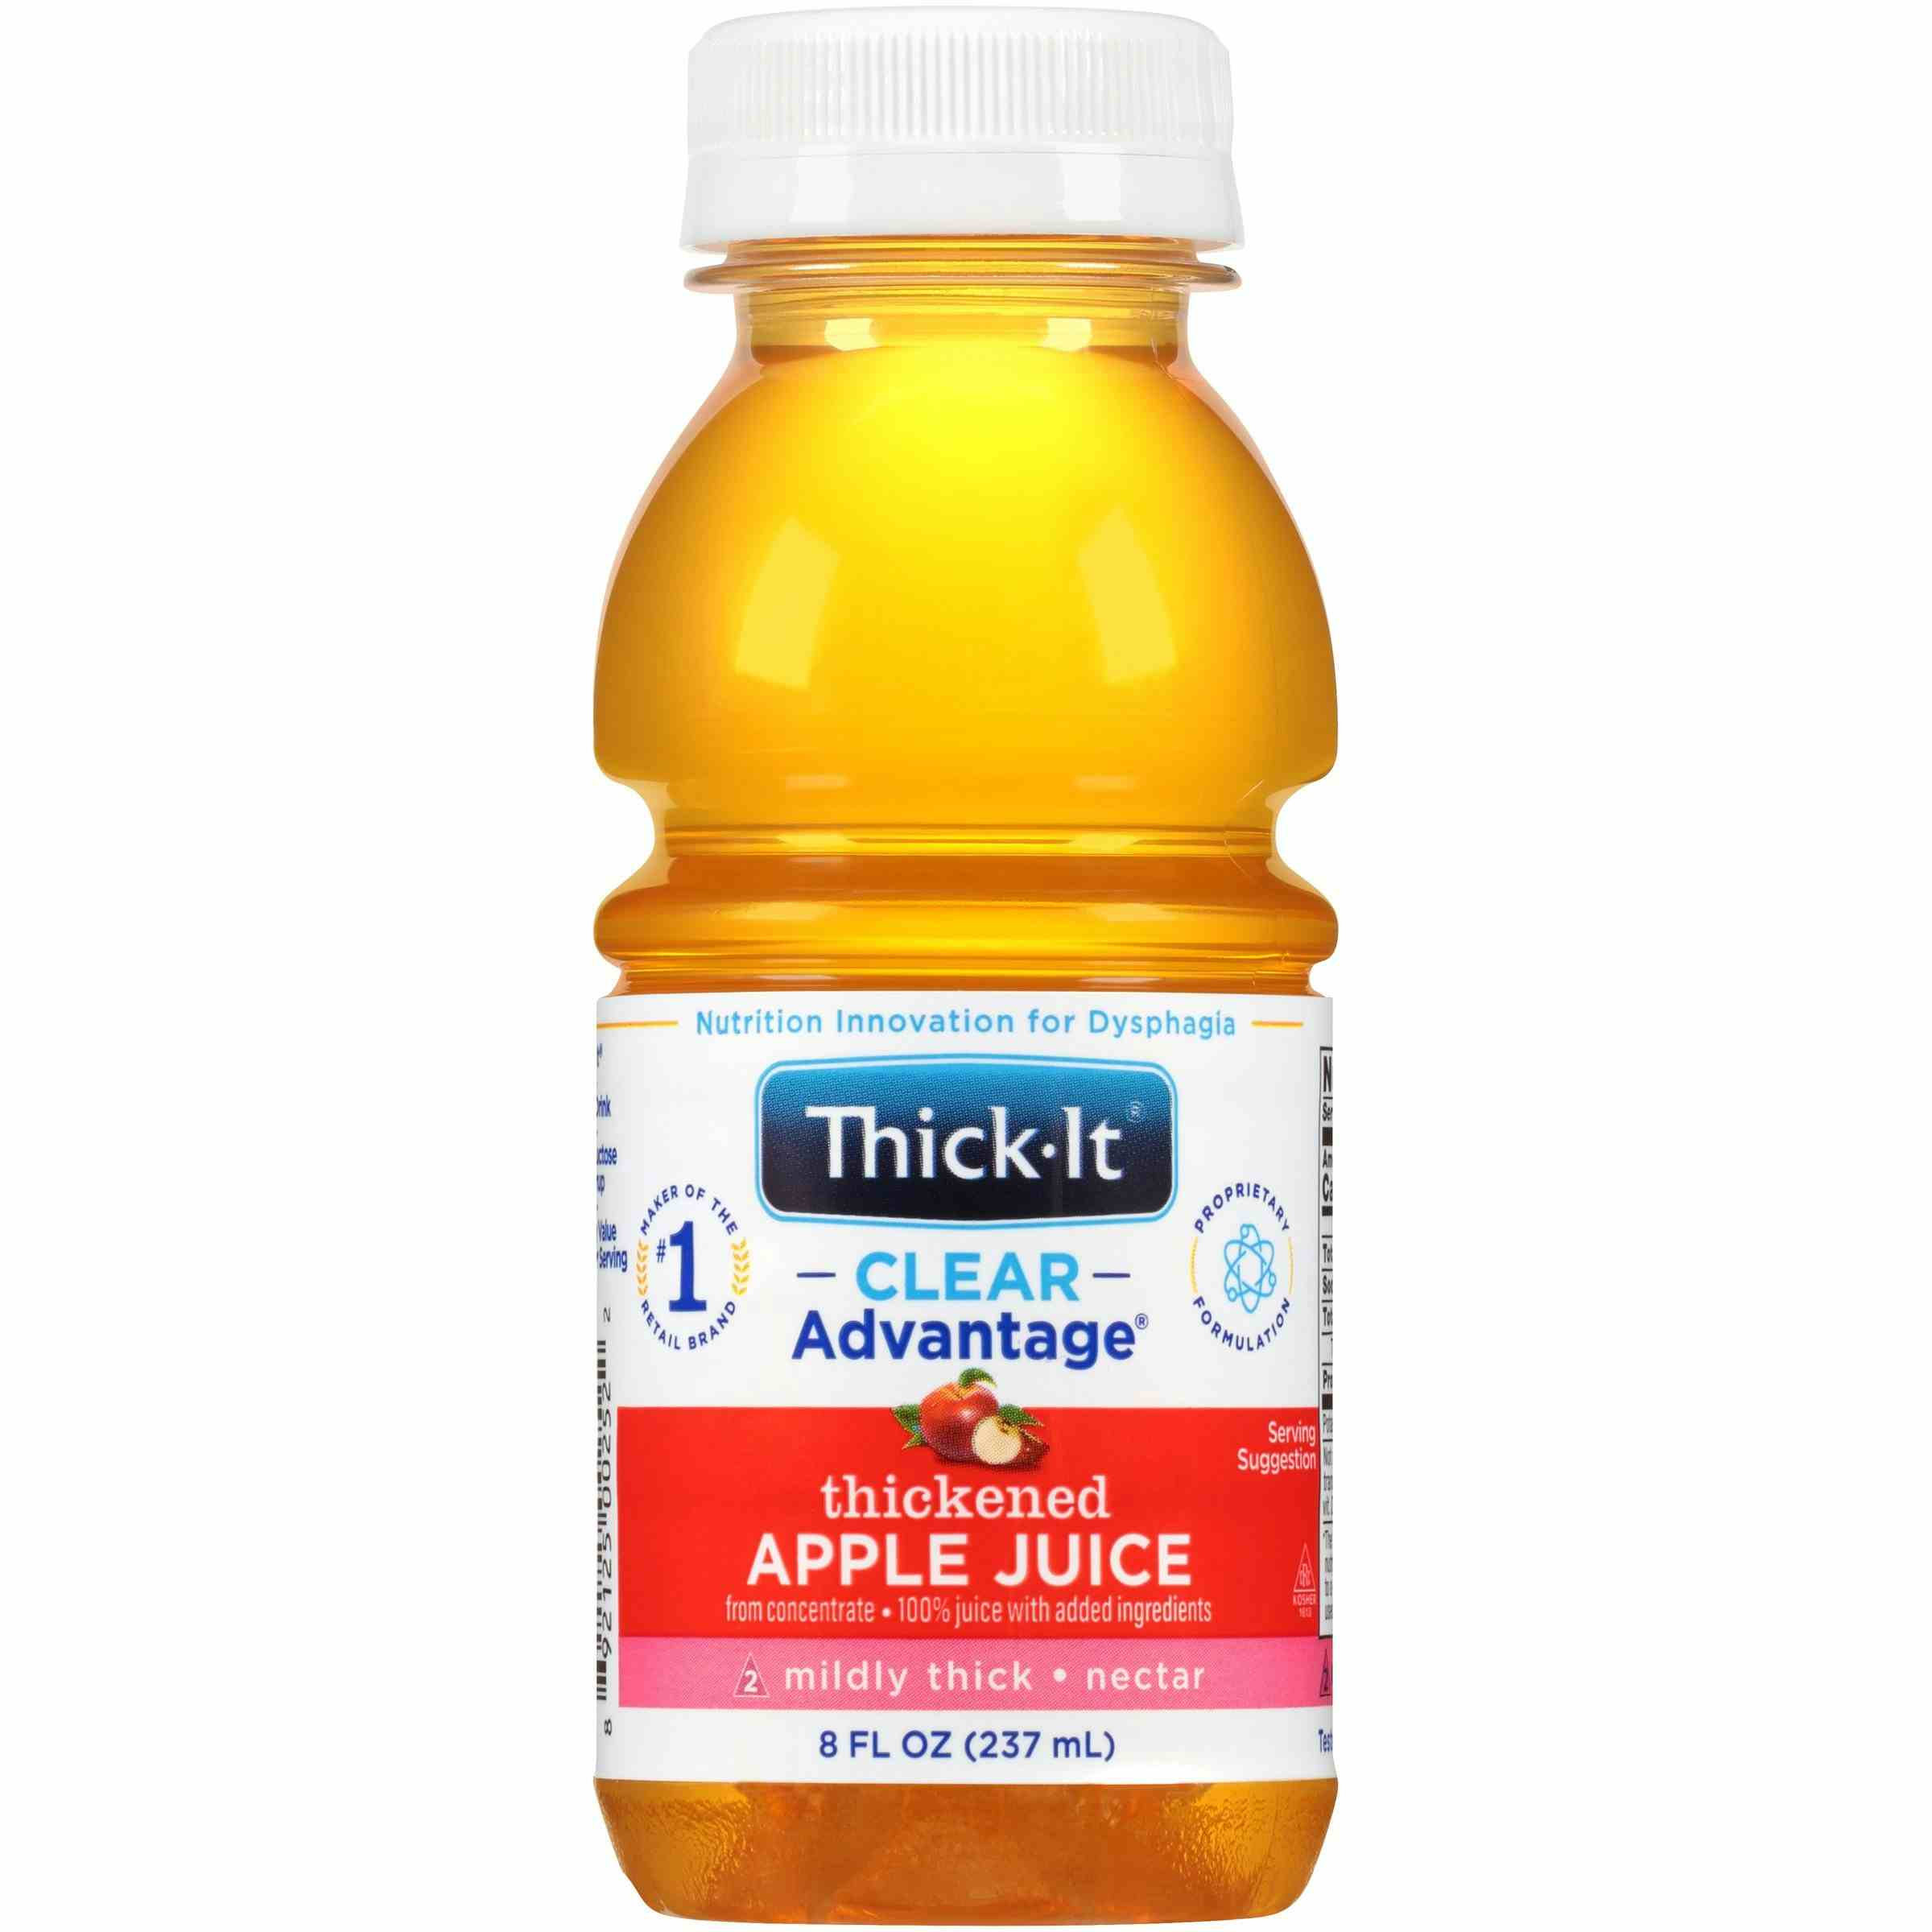 Thick-It Clear Advantage Thickened Apple Juice, Nectar Consistency, Mildly Thick, 8 oz., B455-L9044, Case of 24